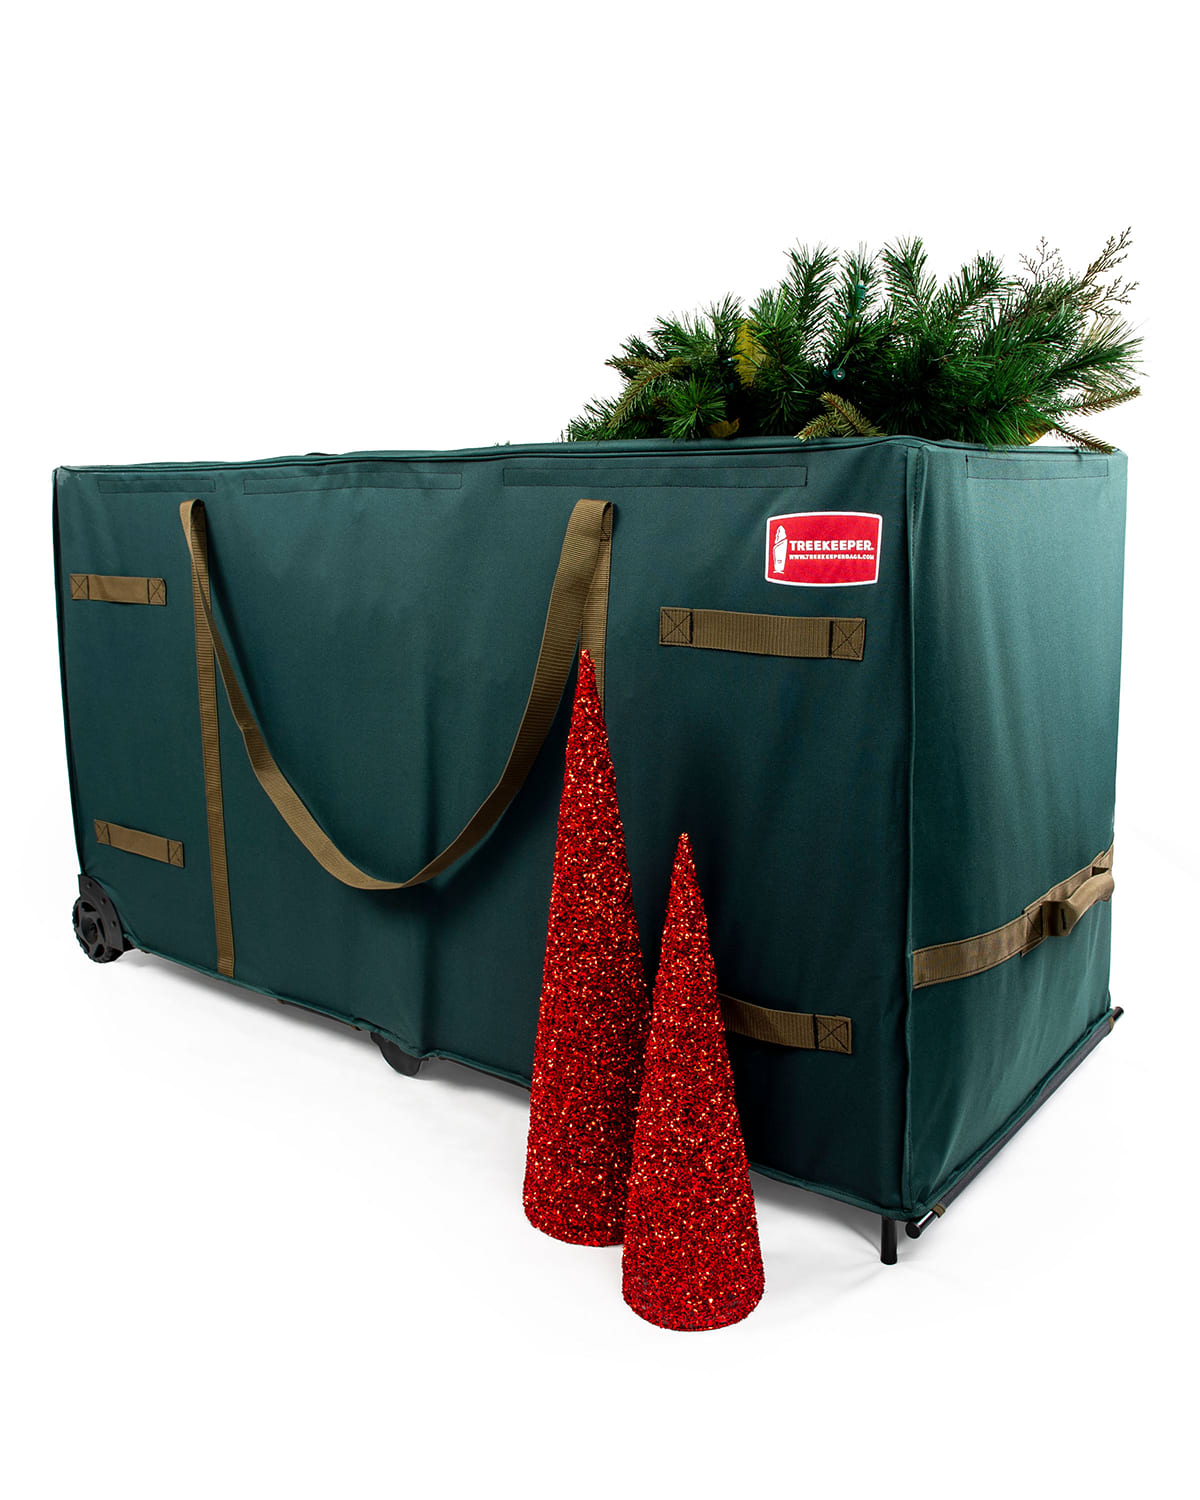 Artificial Christmas Tree Storage Bag with Wheels (9-15 ft. Trees)